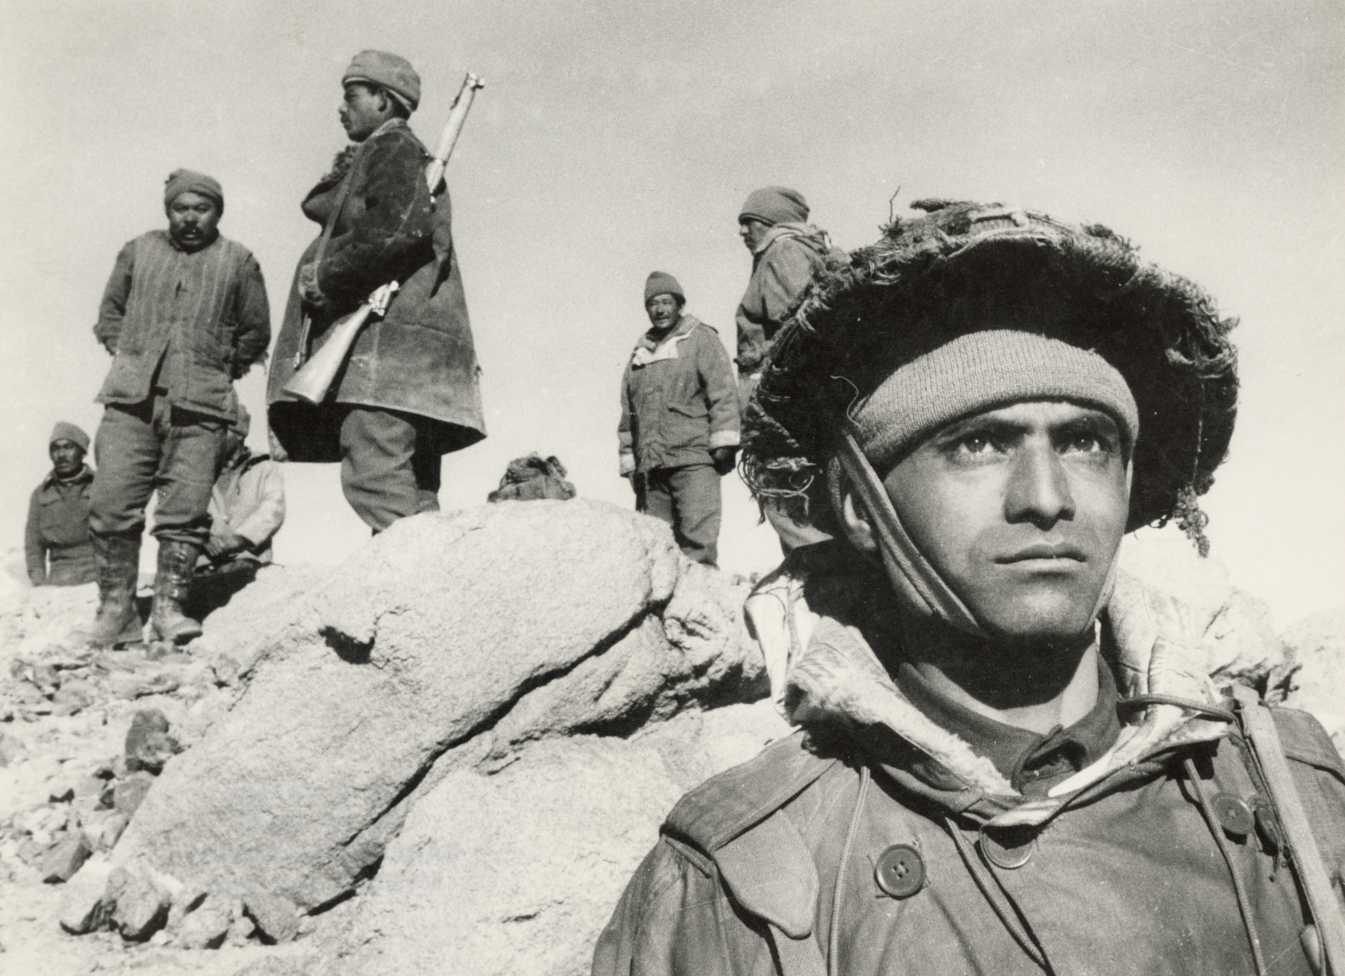 Brave Indian Jawaans Standing Guard on a High Mountain Range Post the India-China Conflict, Ladakh T. S. Satyan, Indian, 1923 - 2009 c.1962 Ladakh, India Silver gelatin print PHY.10028 Gifted by the T. S. Satyan Family Trust Courtesy of Museum of Art & Photography, Bengaluru